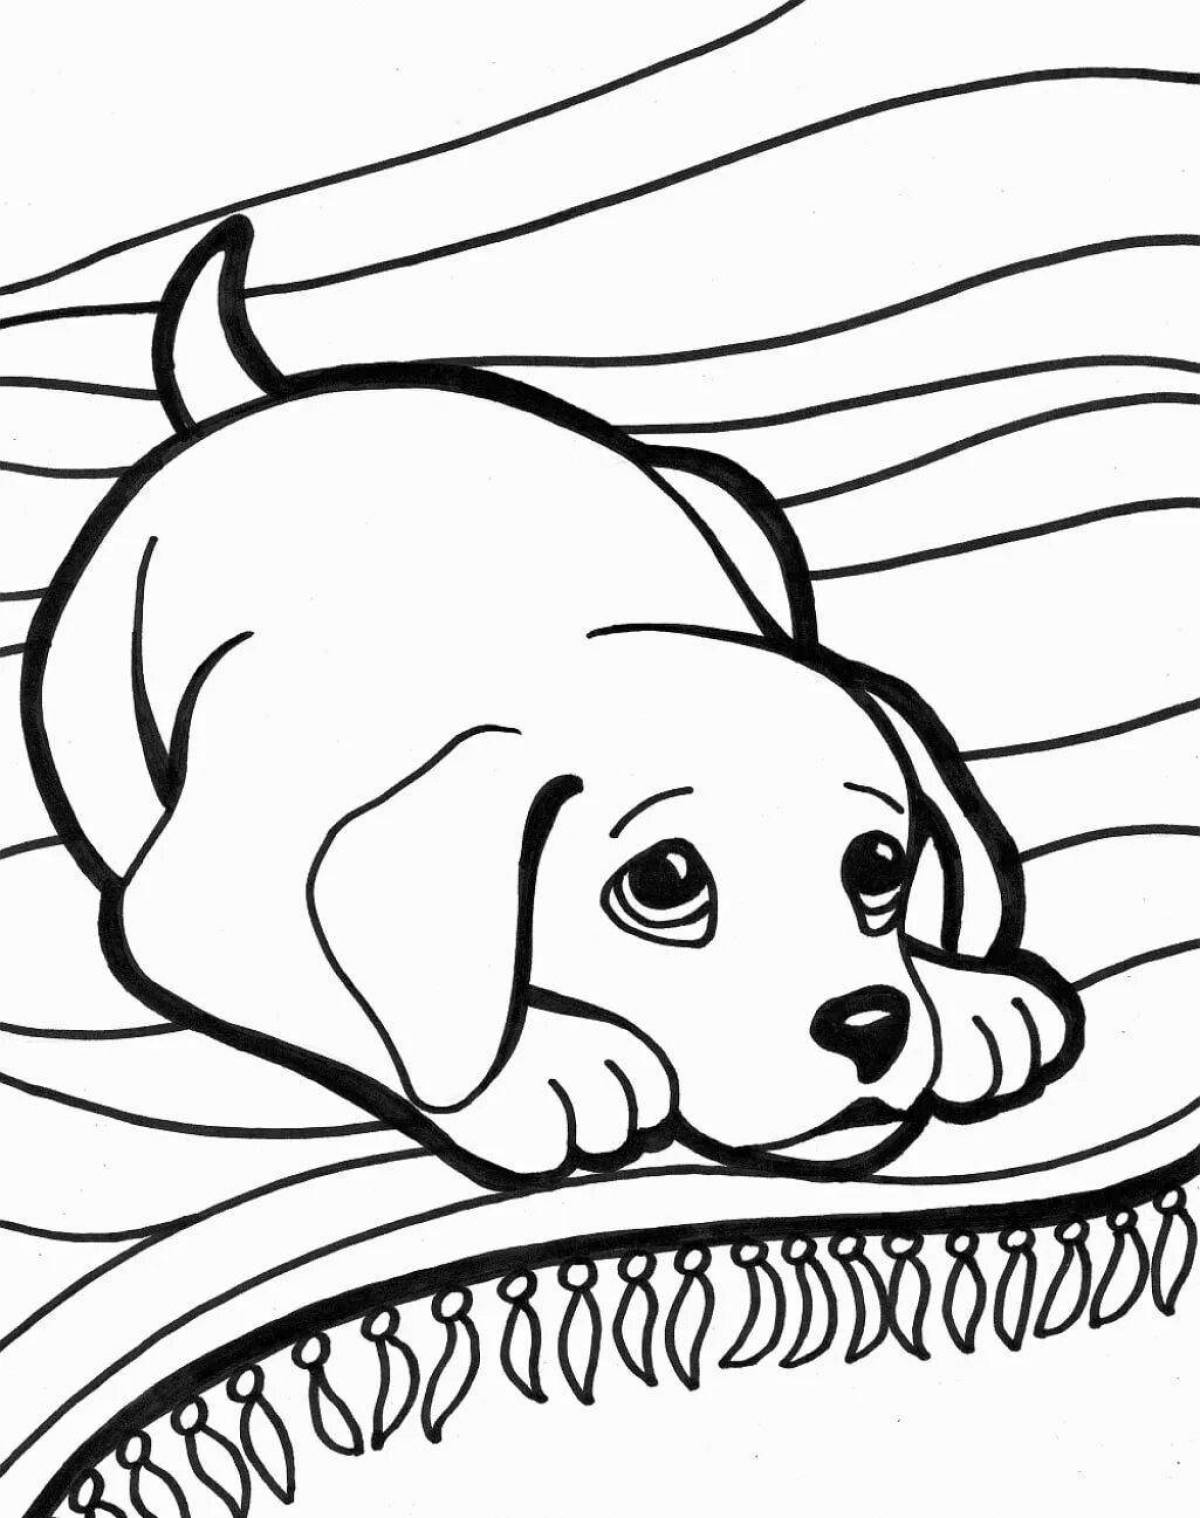 Animal dog coloring pages